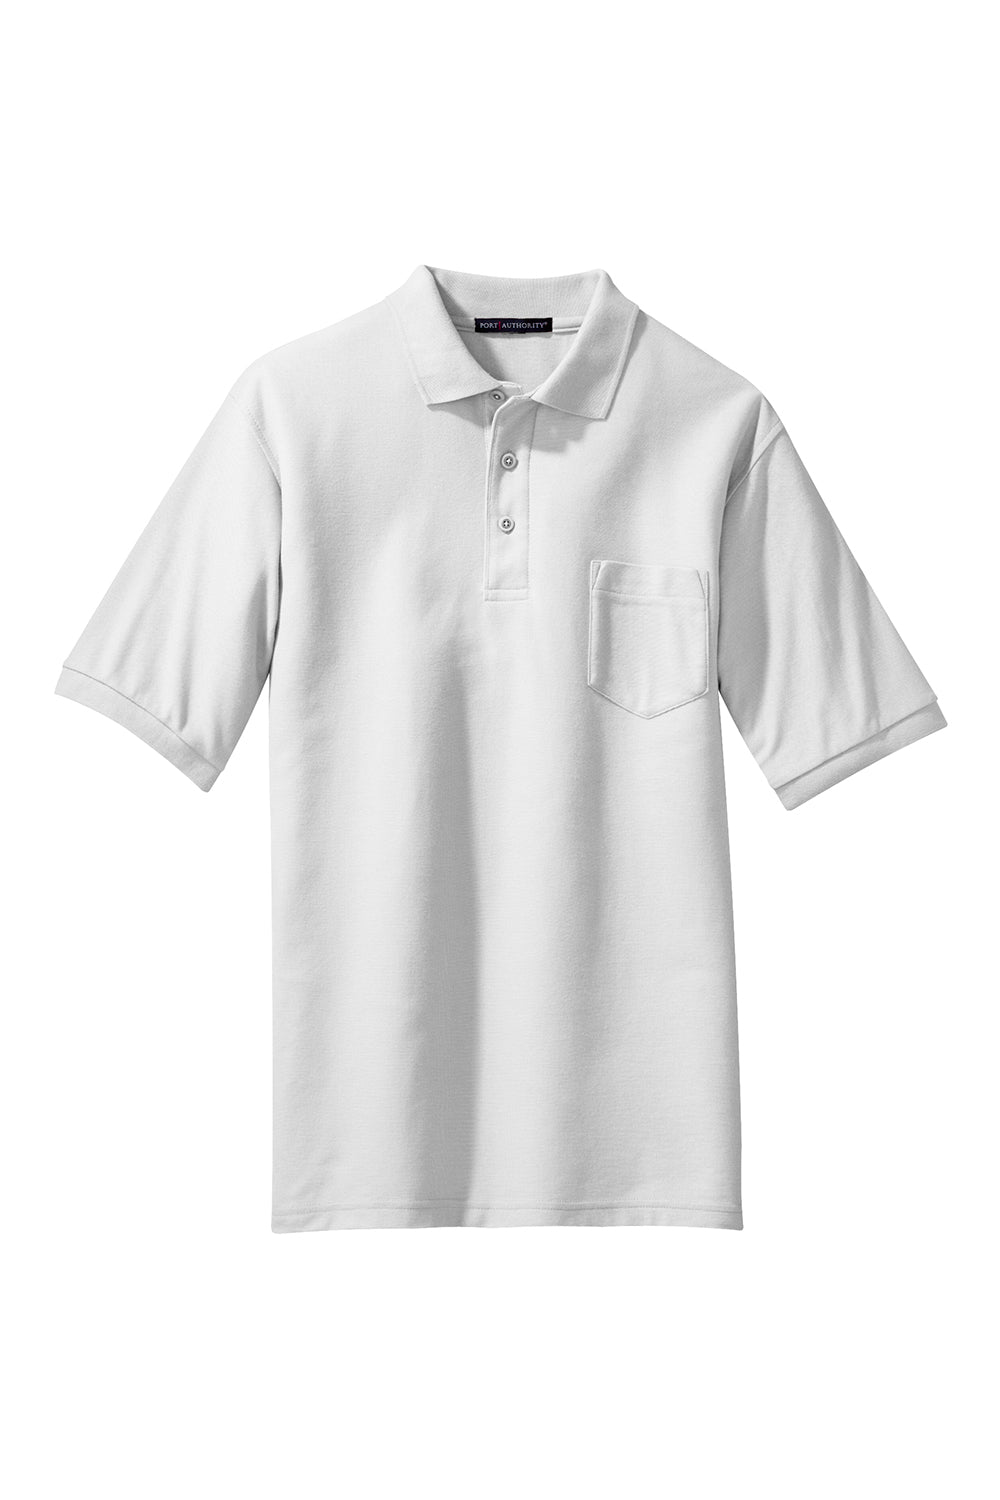 Port Authority K500P Mens Silk Touch Wrinkle Resistant Short Sleeve Polo Shirt w/ Pocket White Flat Front